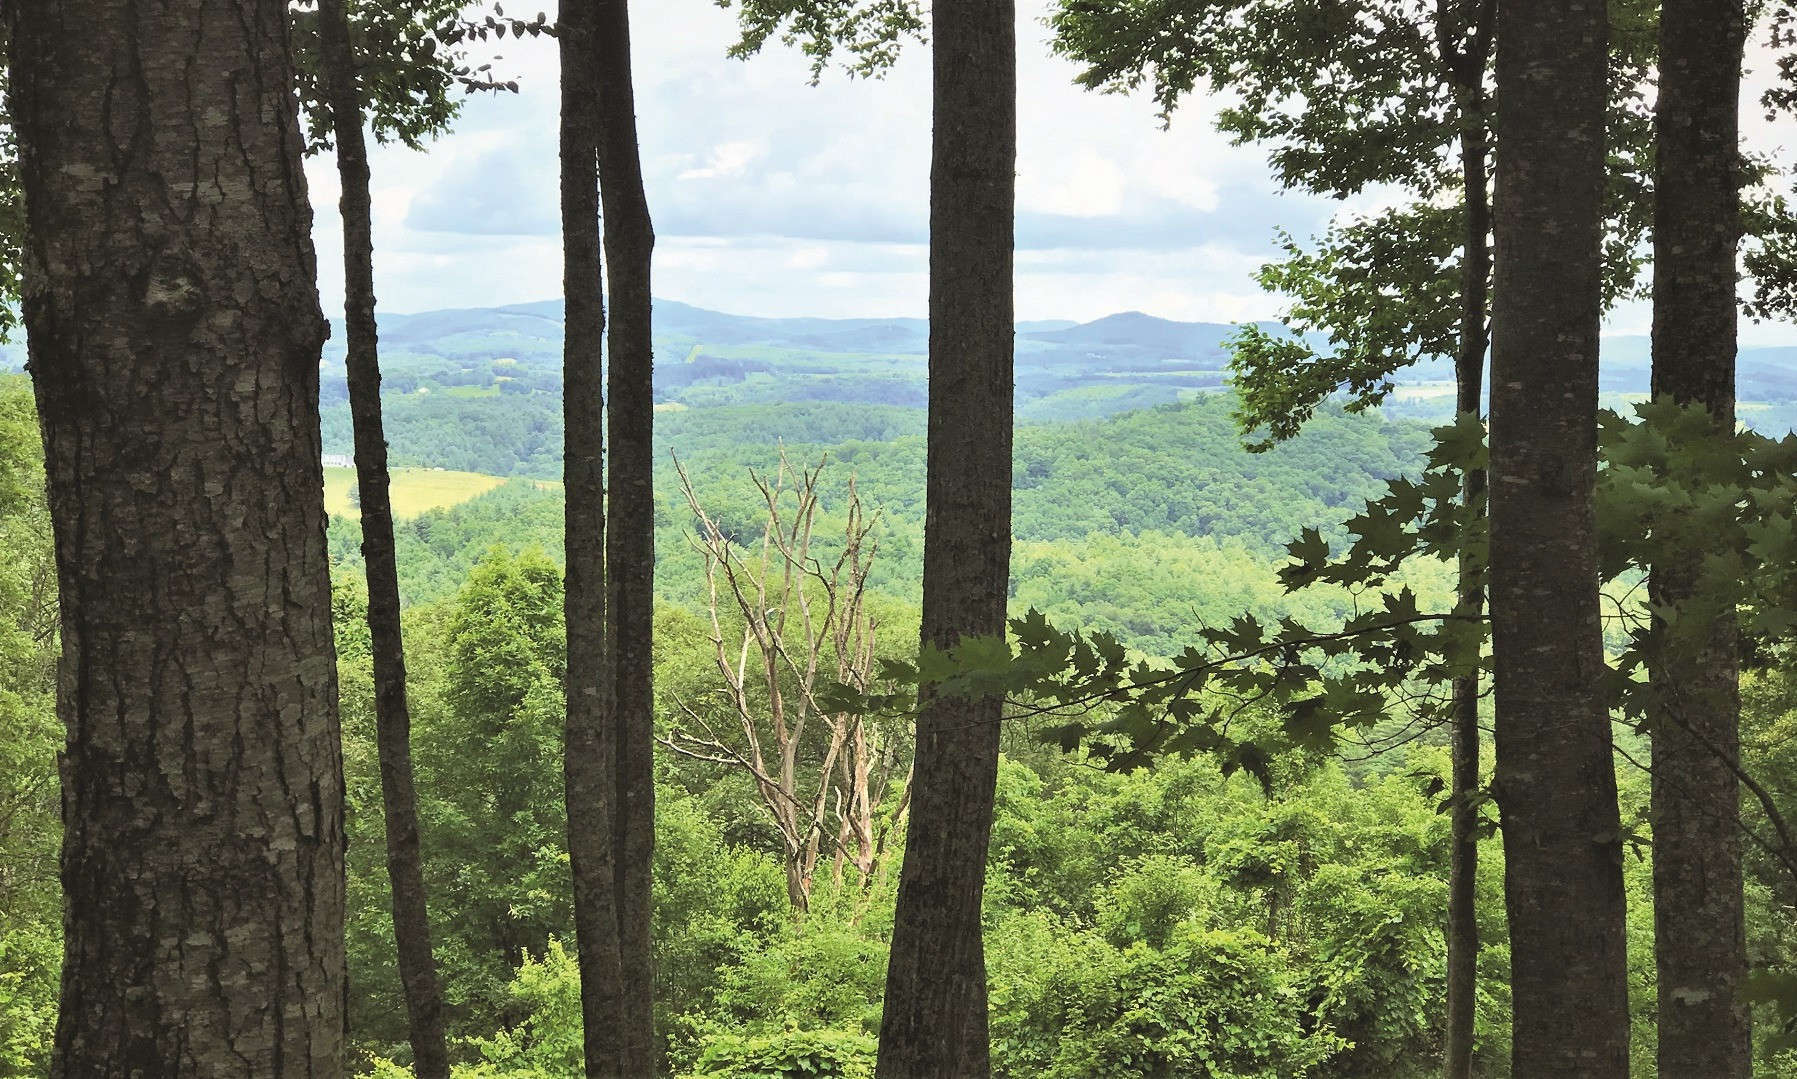 This beautiful 47.67 acre tract of land is located off of Lower Nettle Knob road in southern Ashe County and convenient to Boone and the Jeffersons.